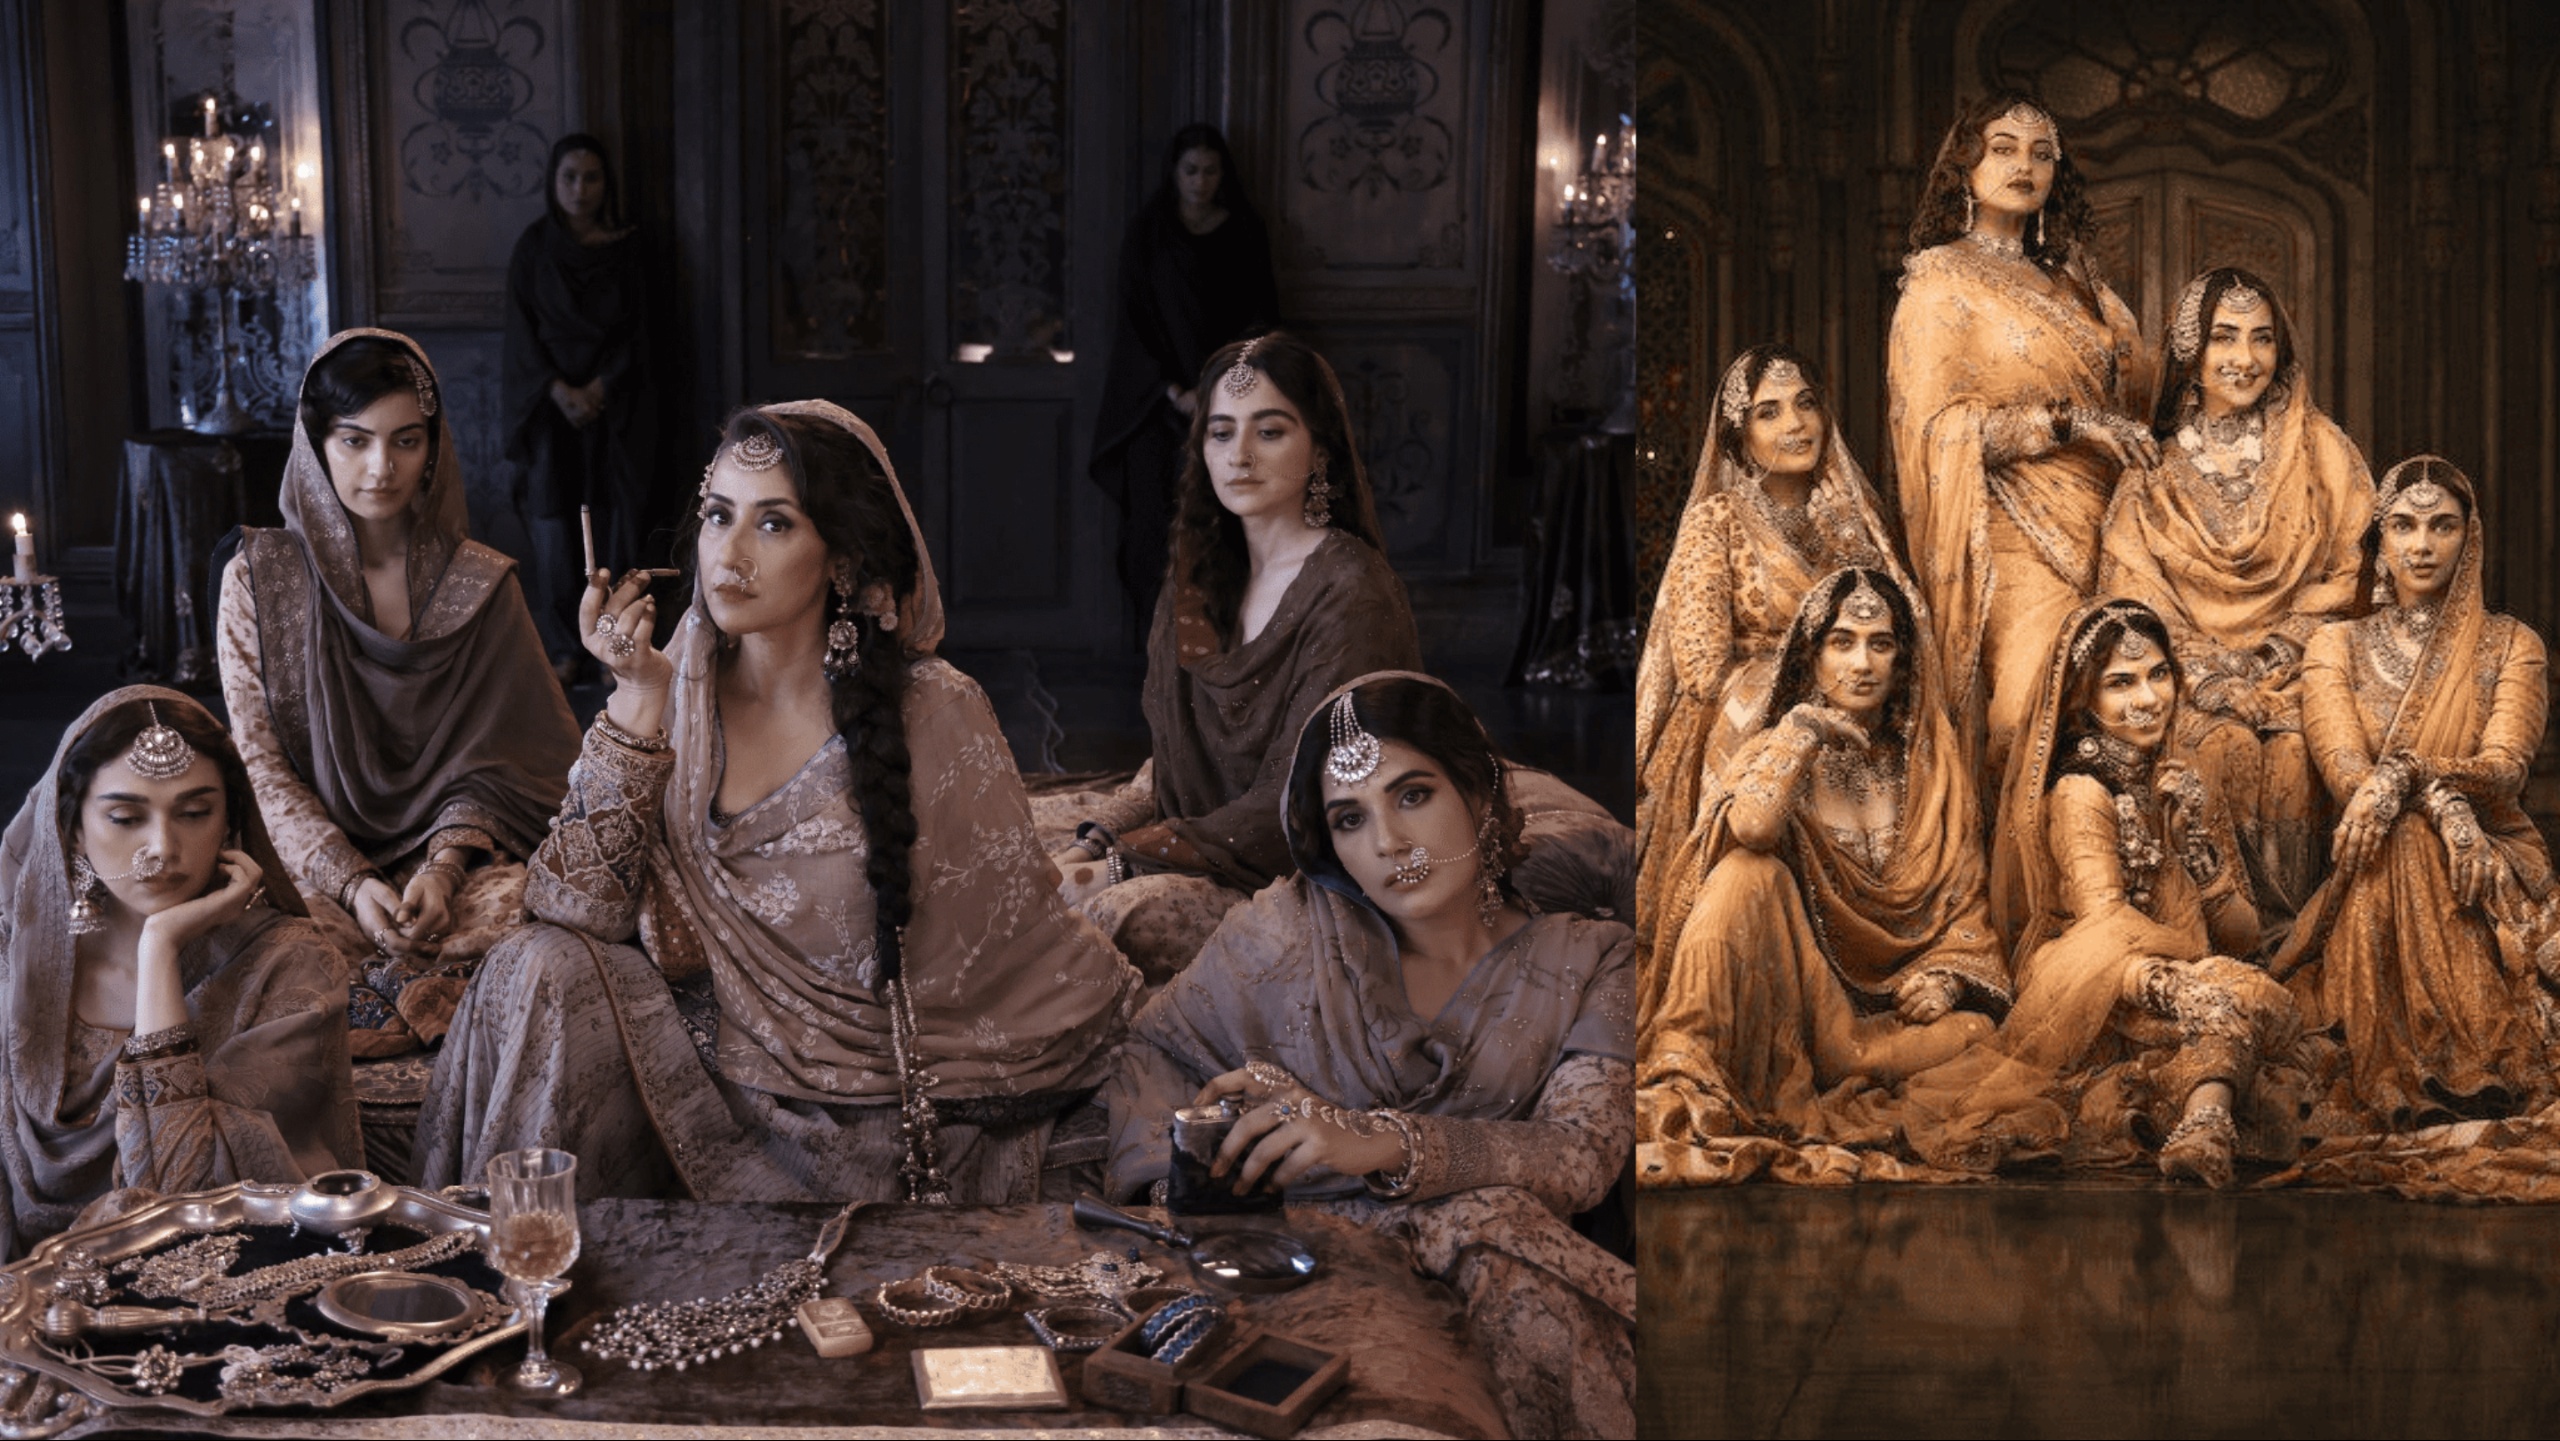 Heeramandi: A Review of Bhansali's Study on Opulence and the Feminine Fortitude